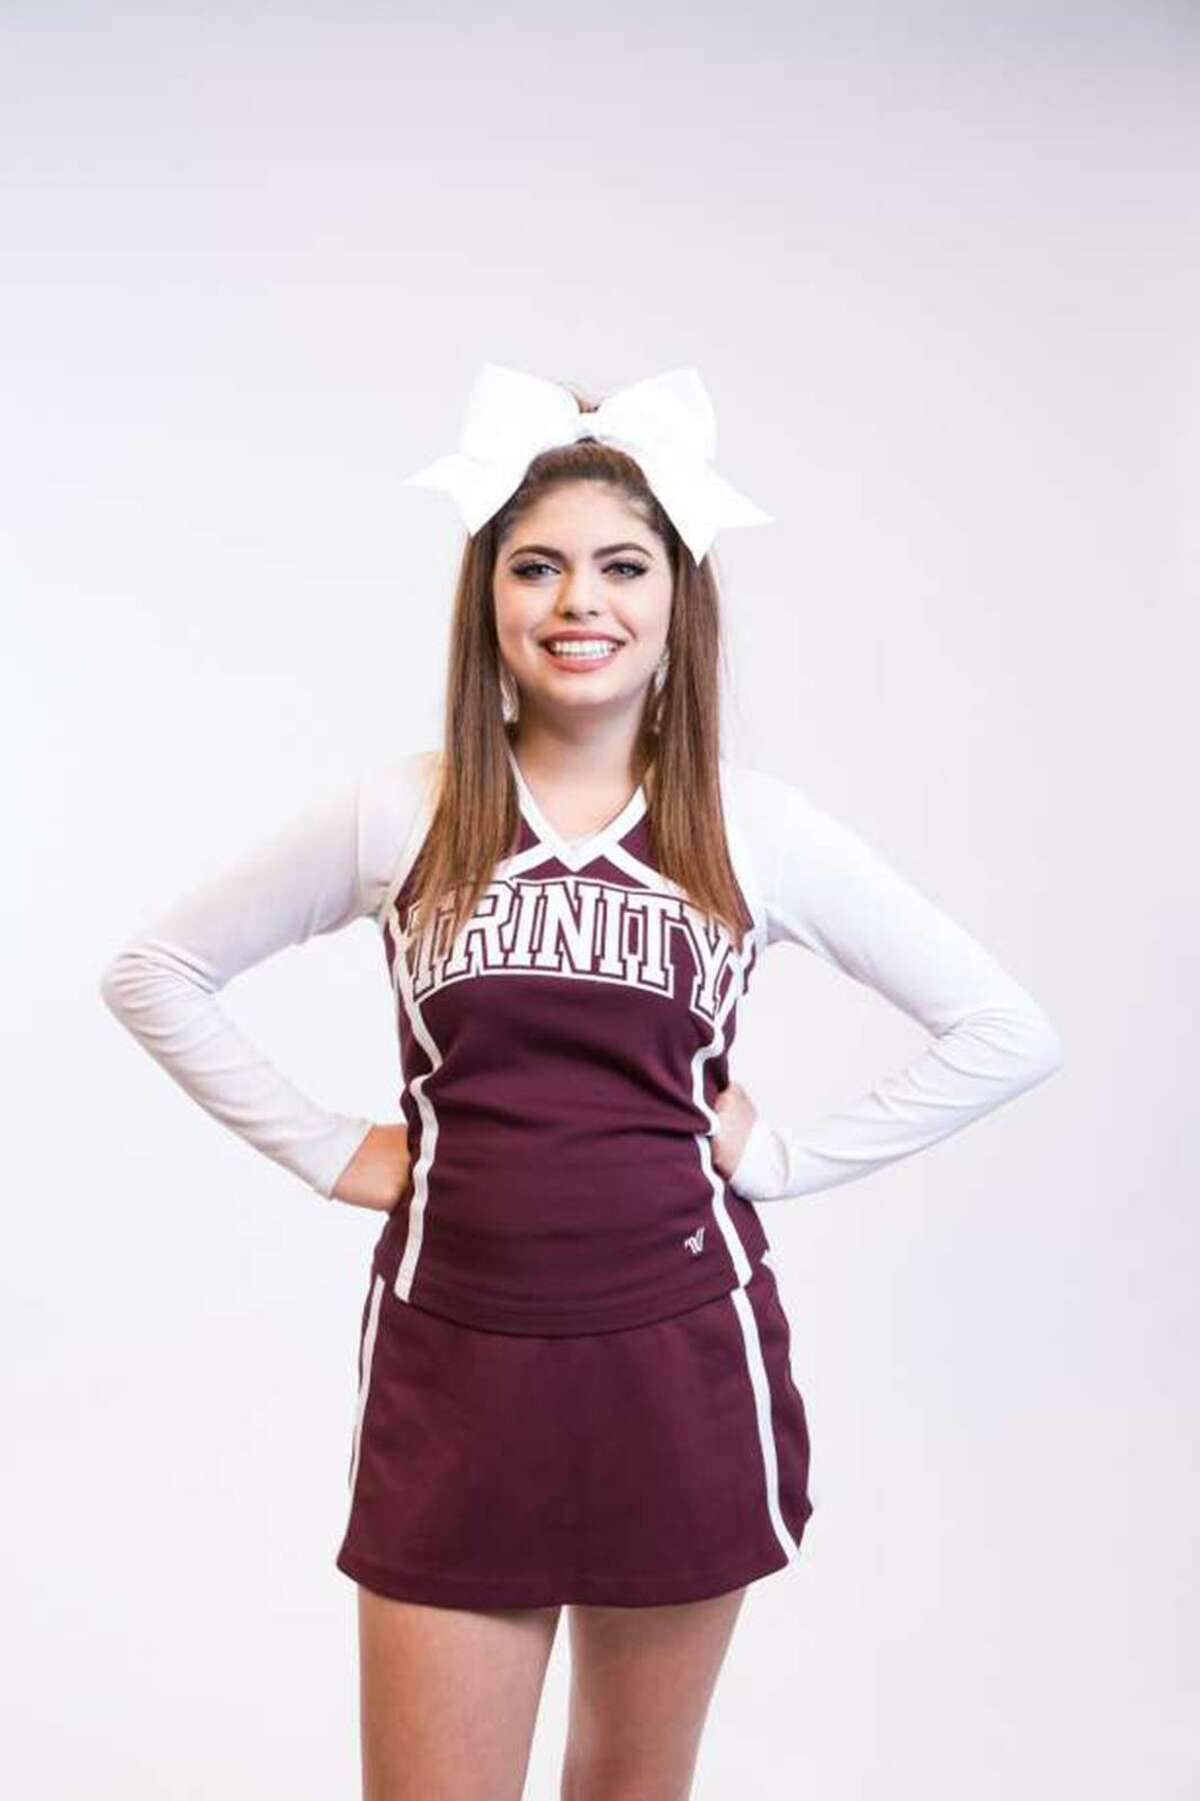 Cayley Mandadi, Trinity University cheerleader, died in 2017 after police say she was sexually abused and beaten. A new statewide alert system may help prevent other such tragedies.